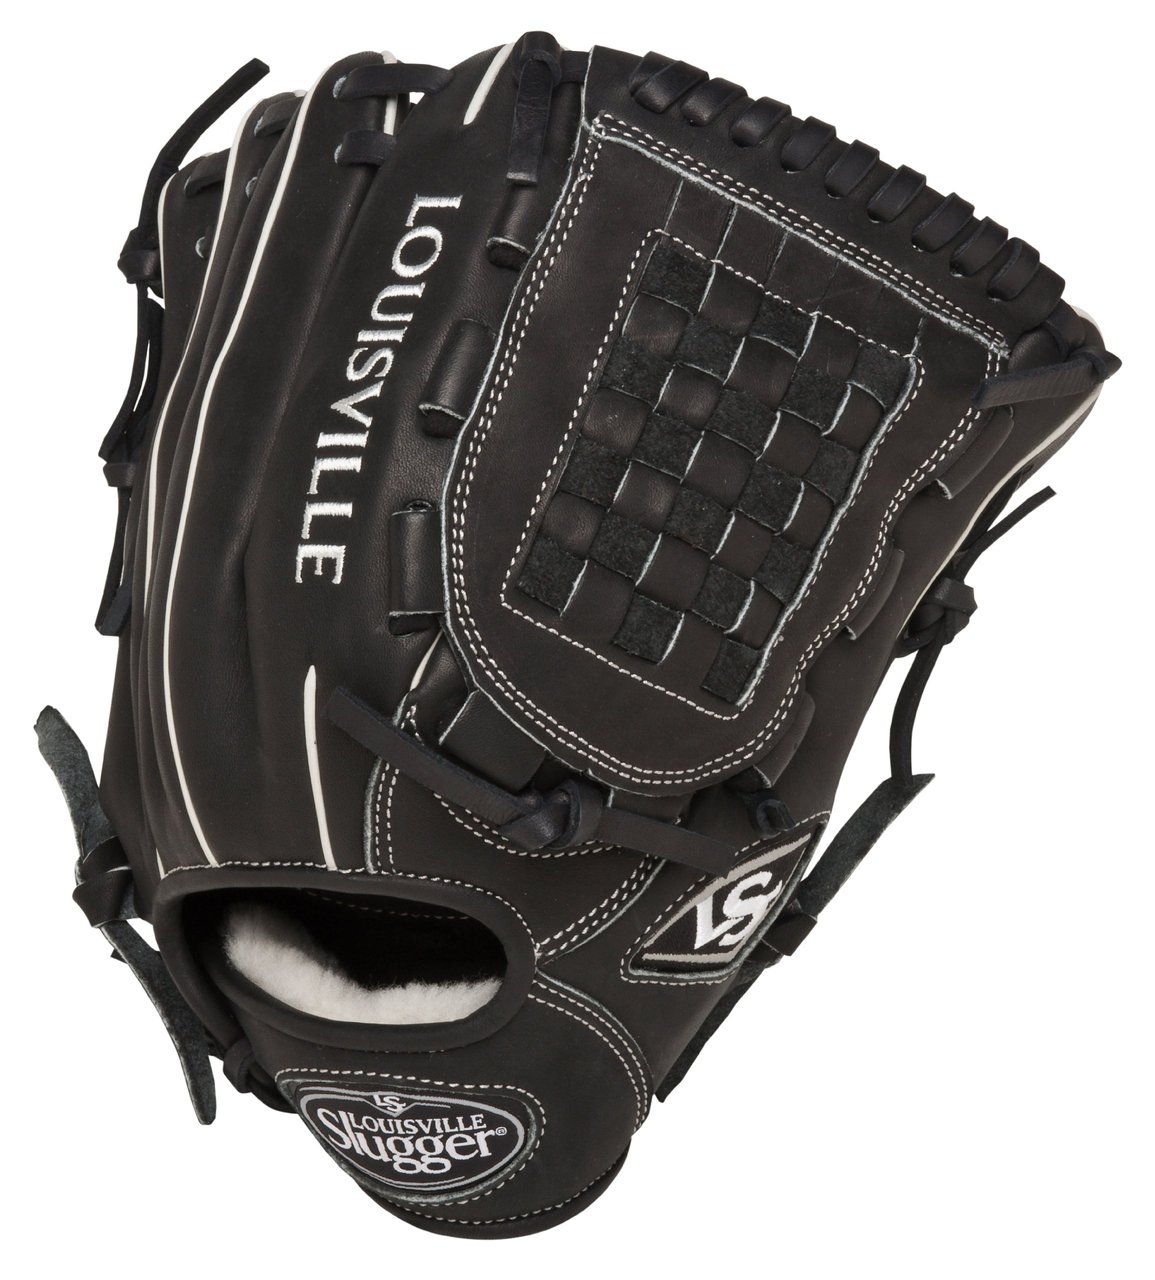 Louisville Slugger Pro Flare Black 12 inch Baseball Glove (Right Handed Throw) : Louisville Slugger Pro Flare Fielding Gloves are preferred by top professional and college players.They are designed with the speed of the game in mind. Louisville Slugger Pro Flare gloves are designed to keep pace with the evolution of Baseball. The unique Flare design allows for quick-transfer of ball from glove to hand, because every split second counts. Better technology, better materials and better design. There is a larger catching surface area made possible by the extra wide lacing and curved finger tips. The gloves are made from professional-grade oil infused leather for maximum feel and performance.